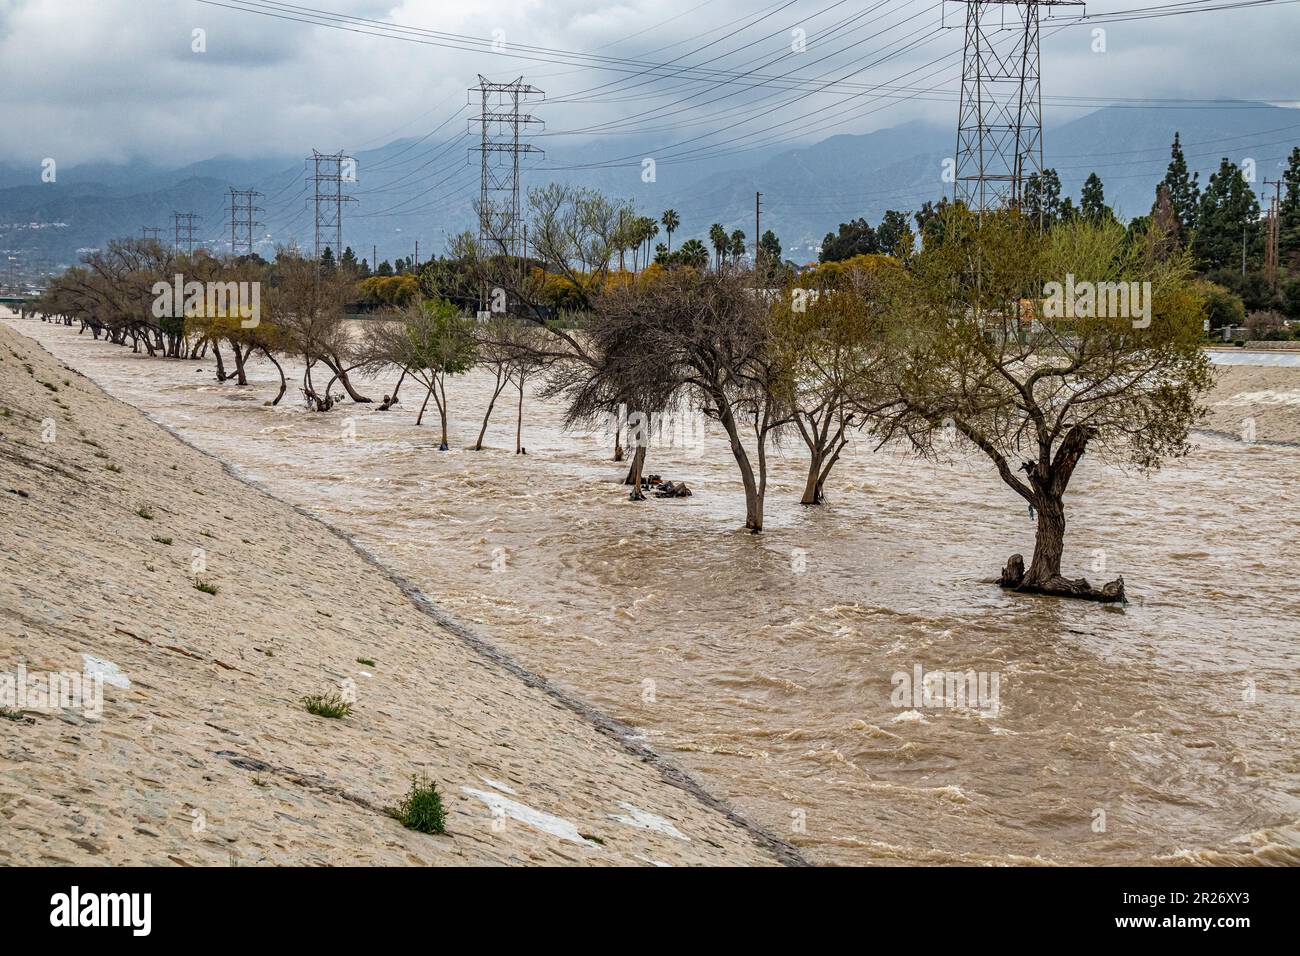 Los Angeles River after a major storm that washed away large areas of vegetation, trees, and homeless encampments. Glendale Narrows, Los Angeles, California Stock Photo